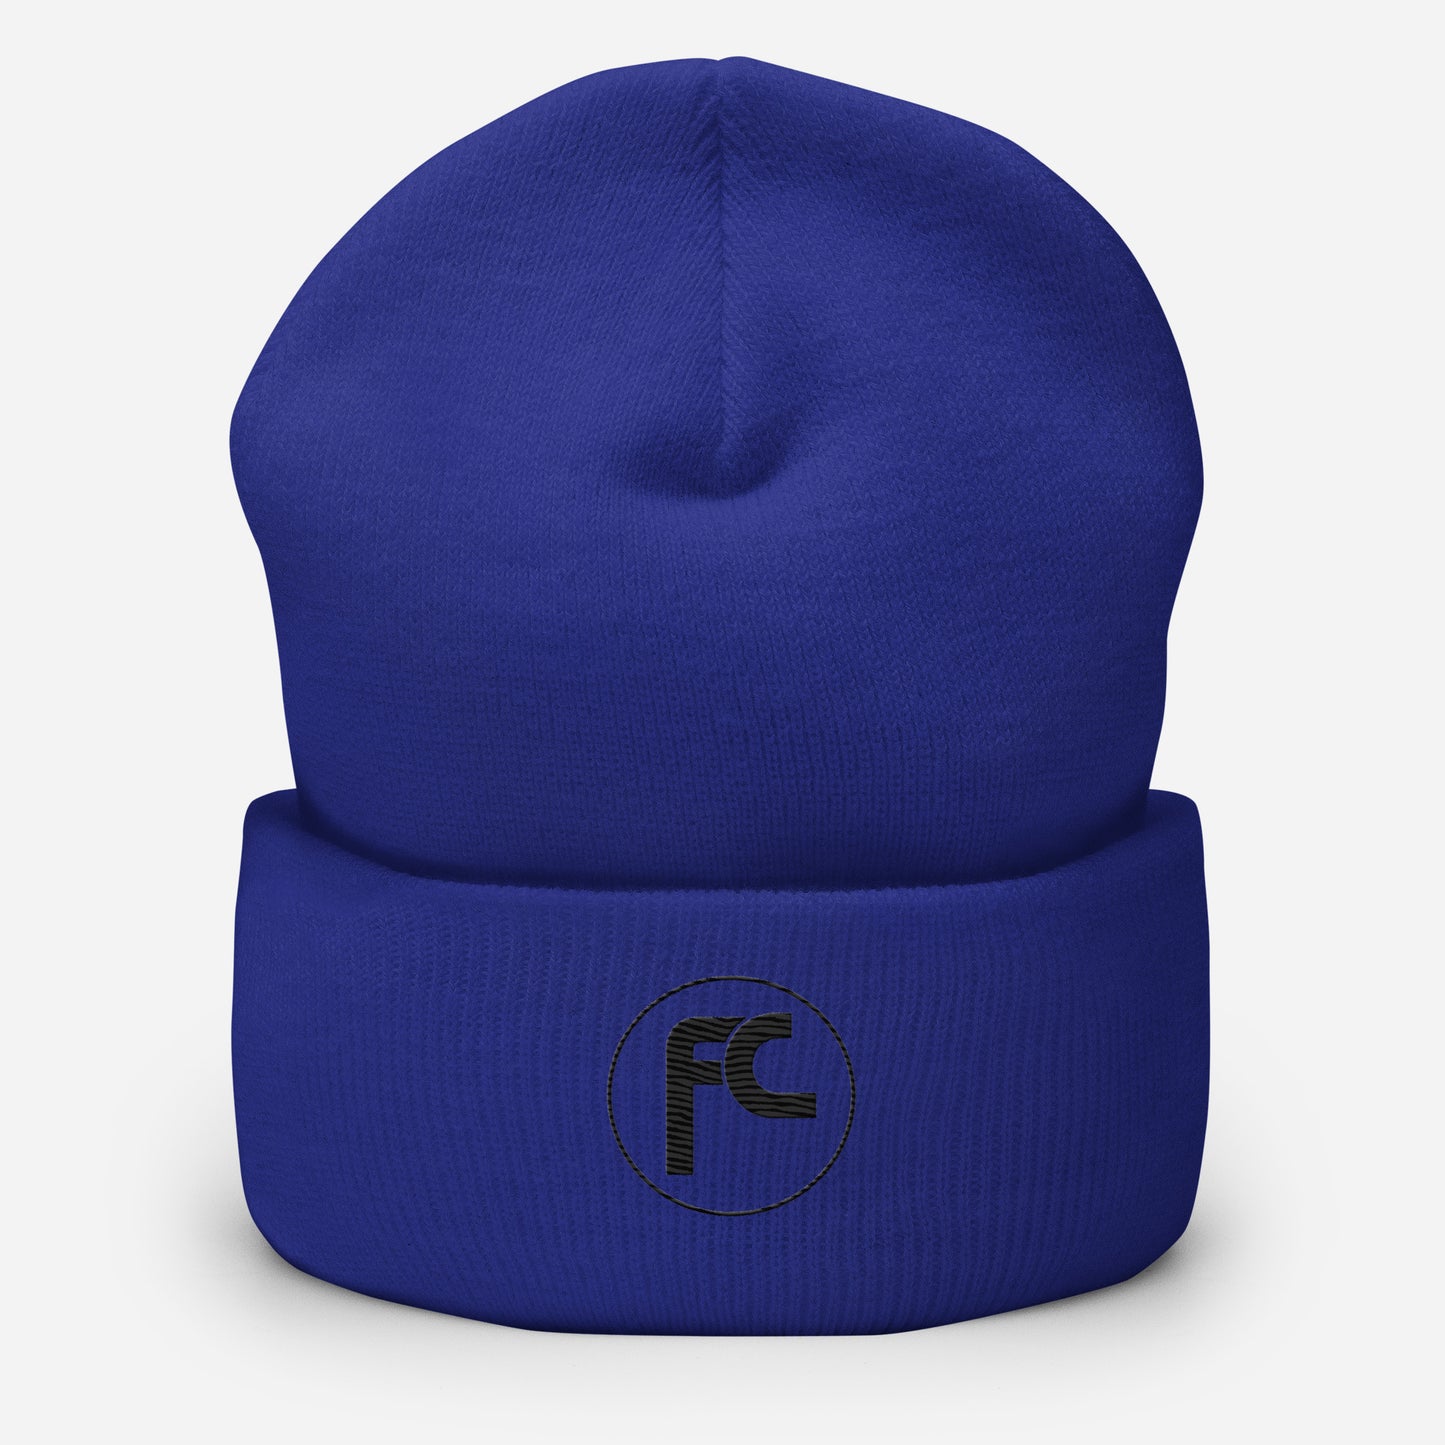 FC EMBROIDERED Beanie